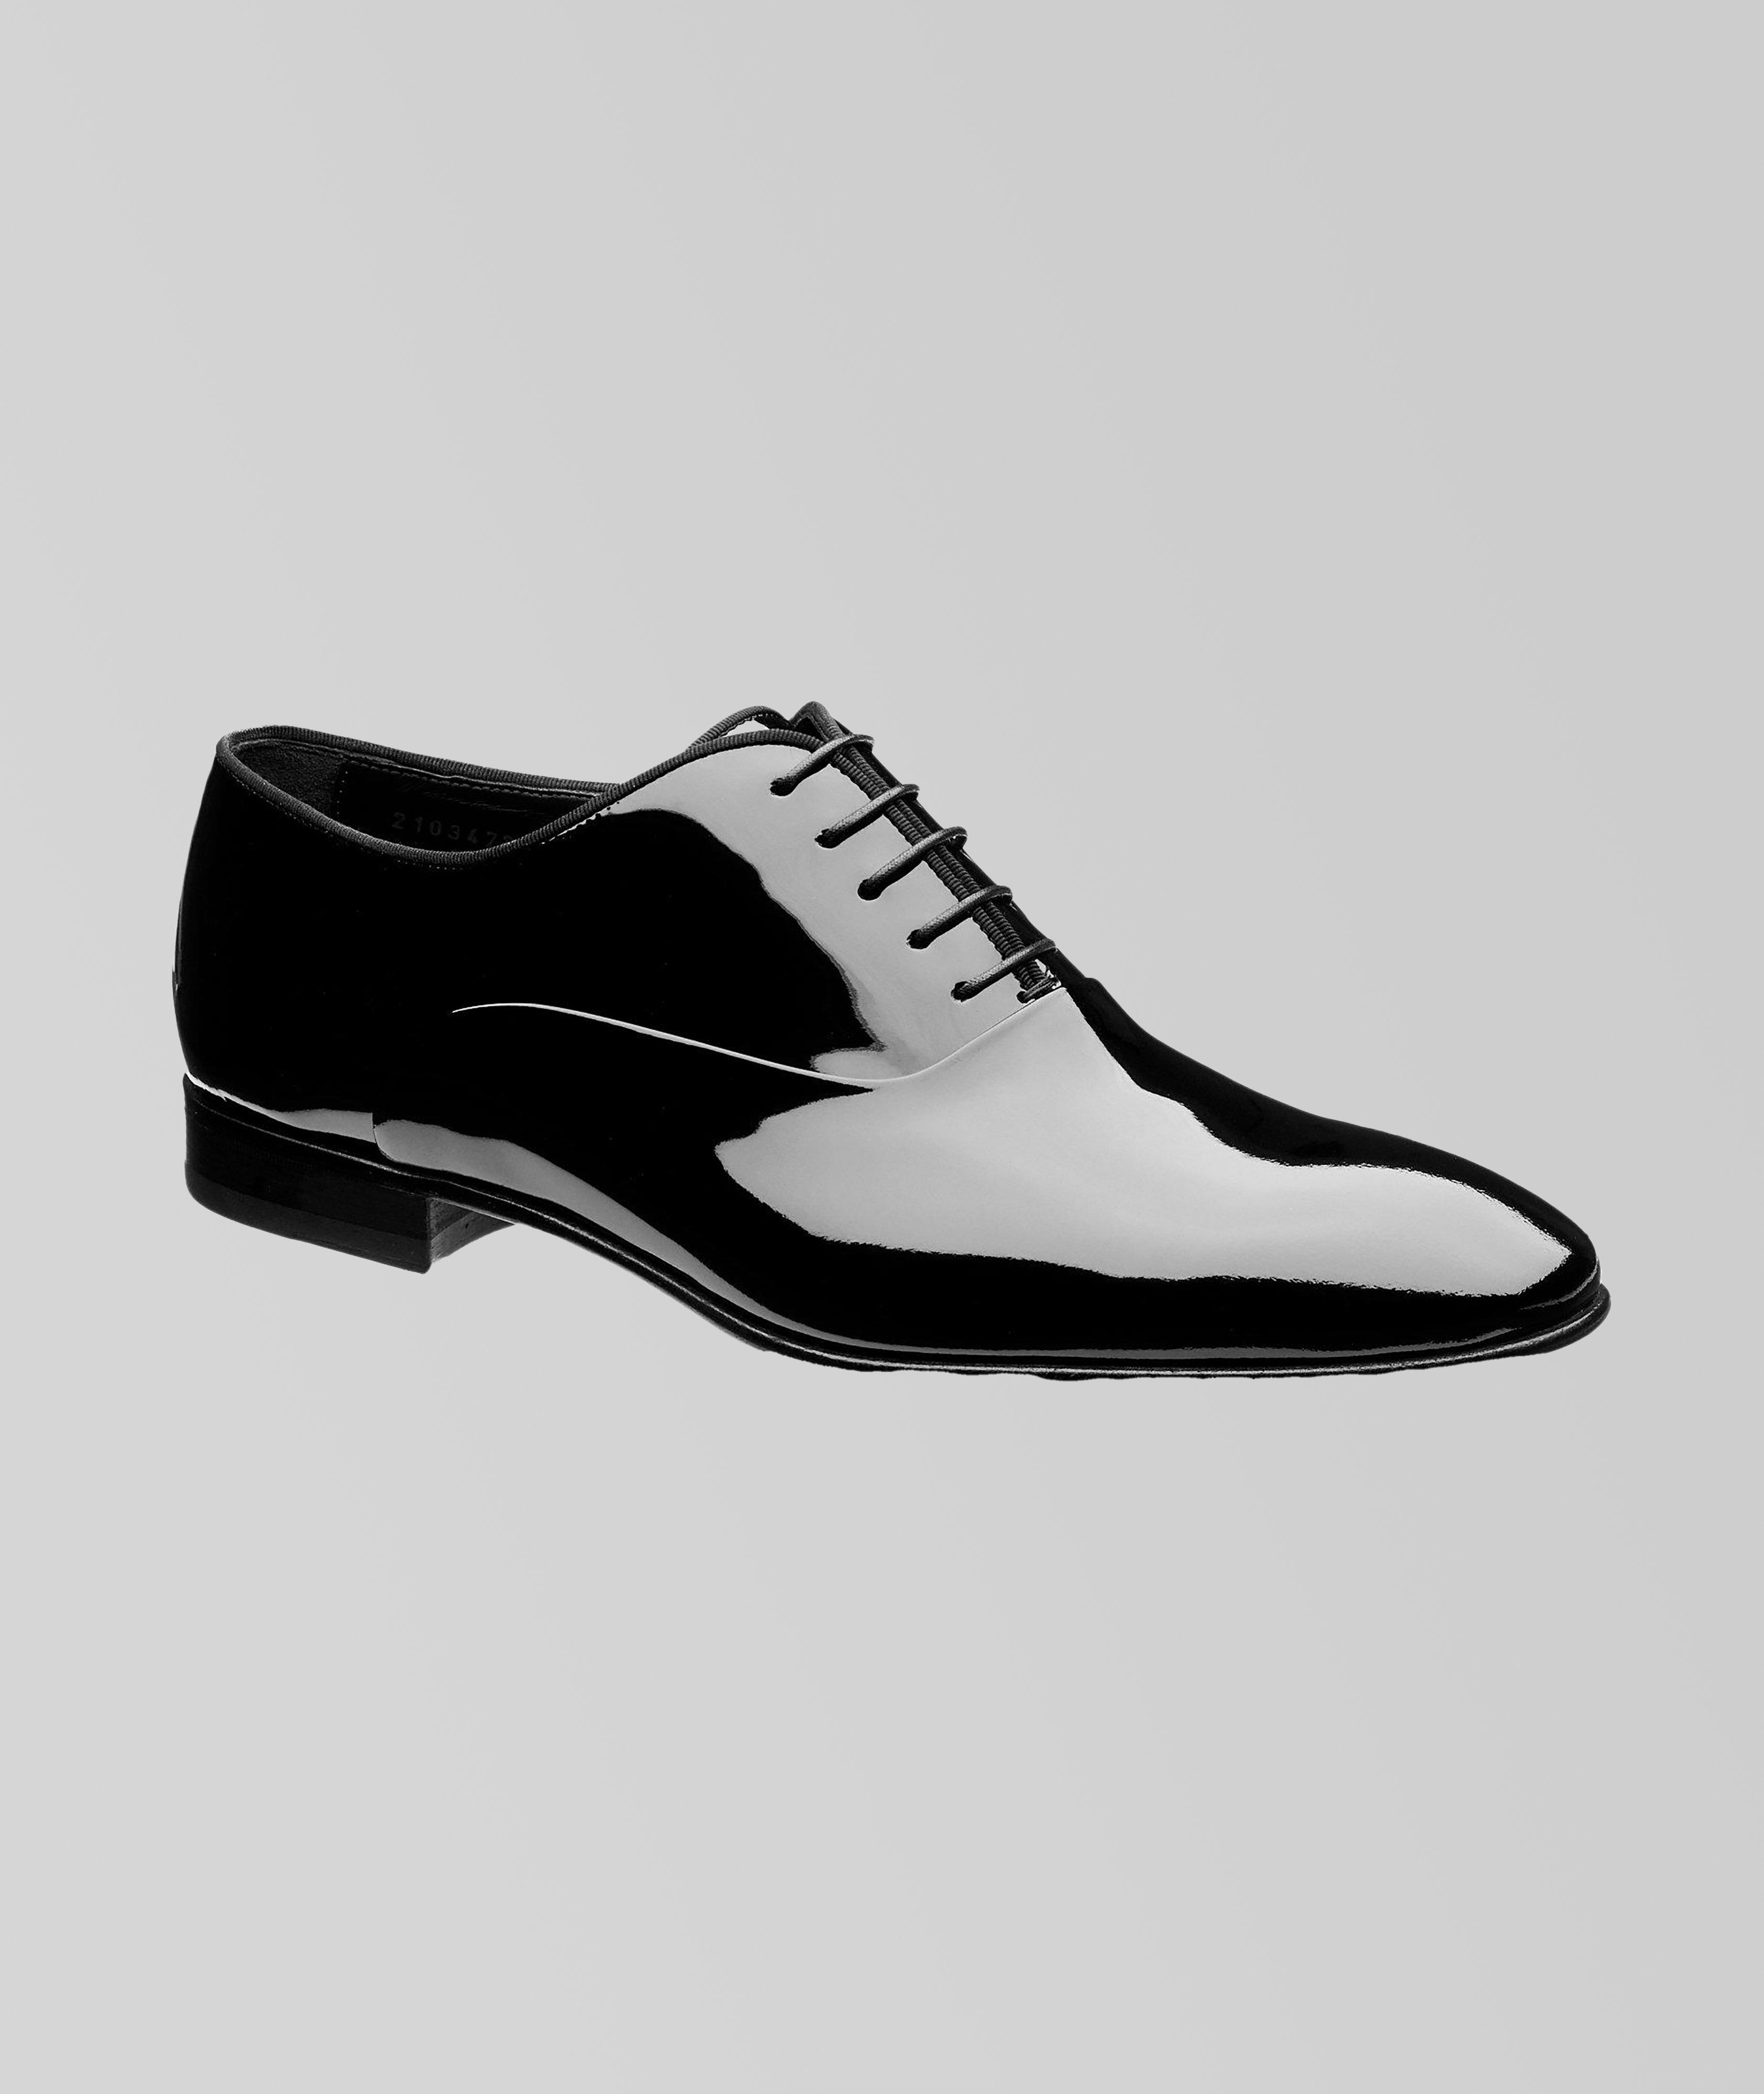 Patent Leather Oxfords image 0